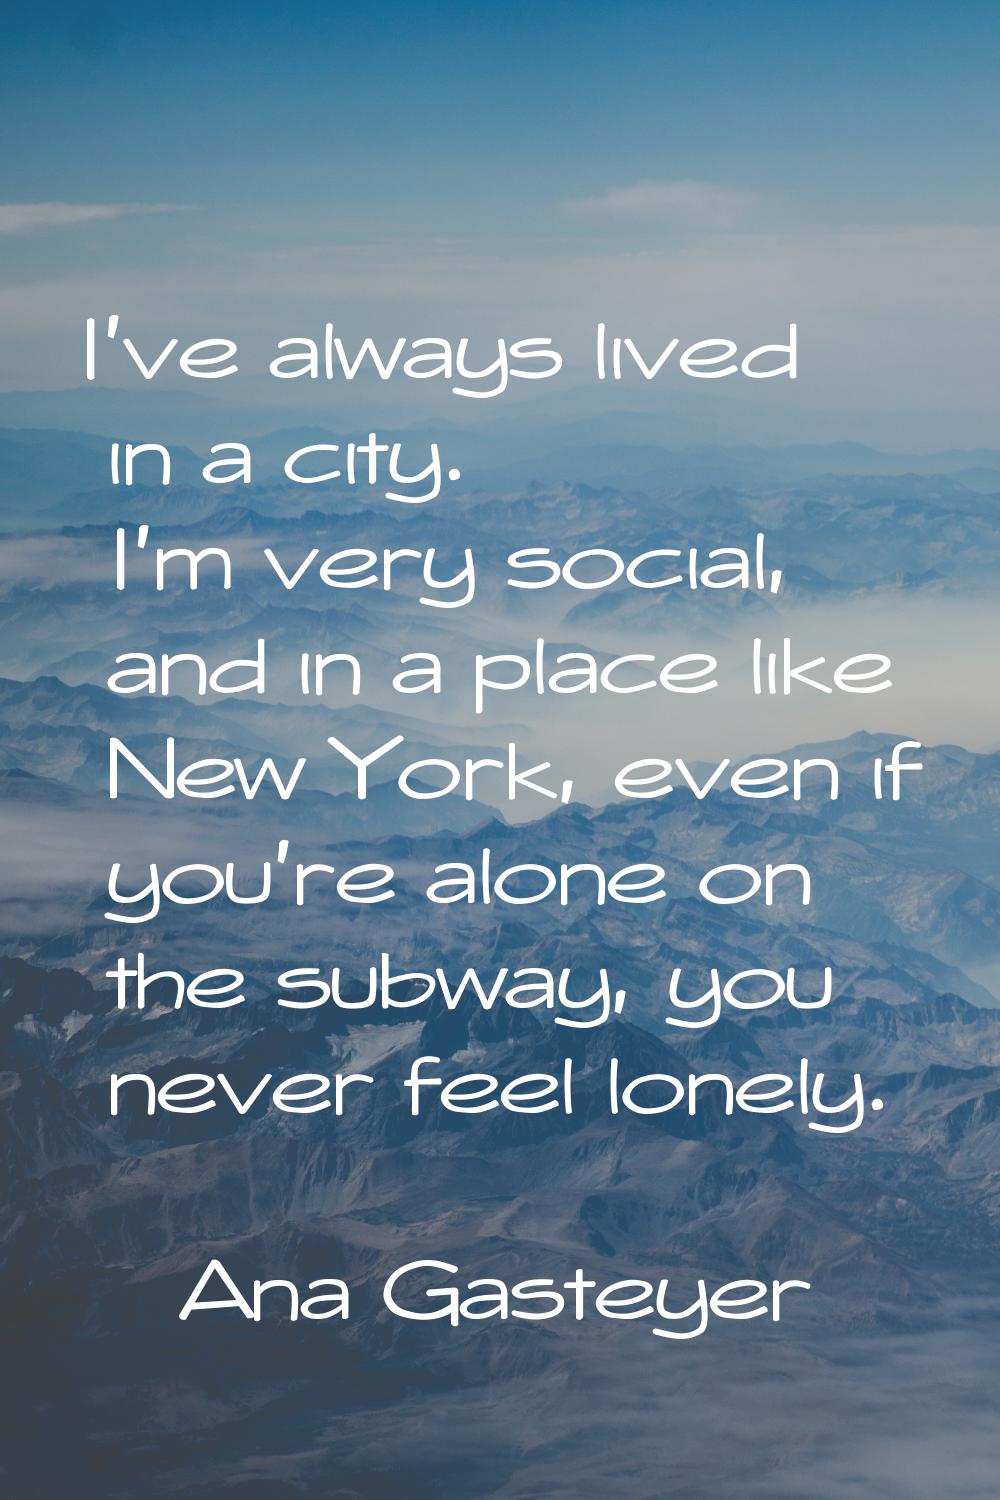 I've always lived in a city. I'm very social, and in a place like New York, even if you're alone on